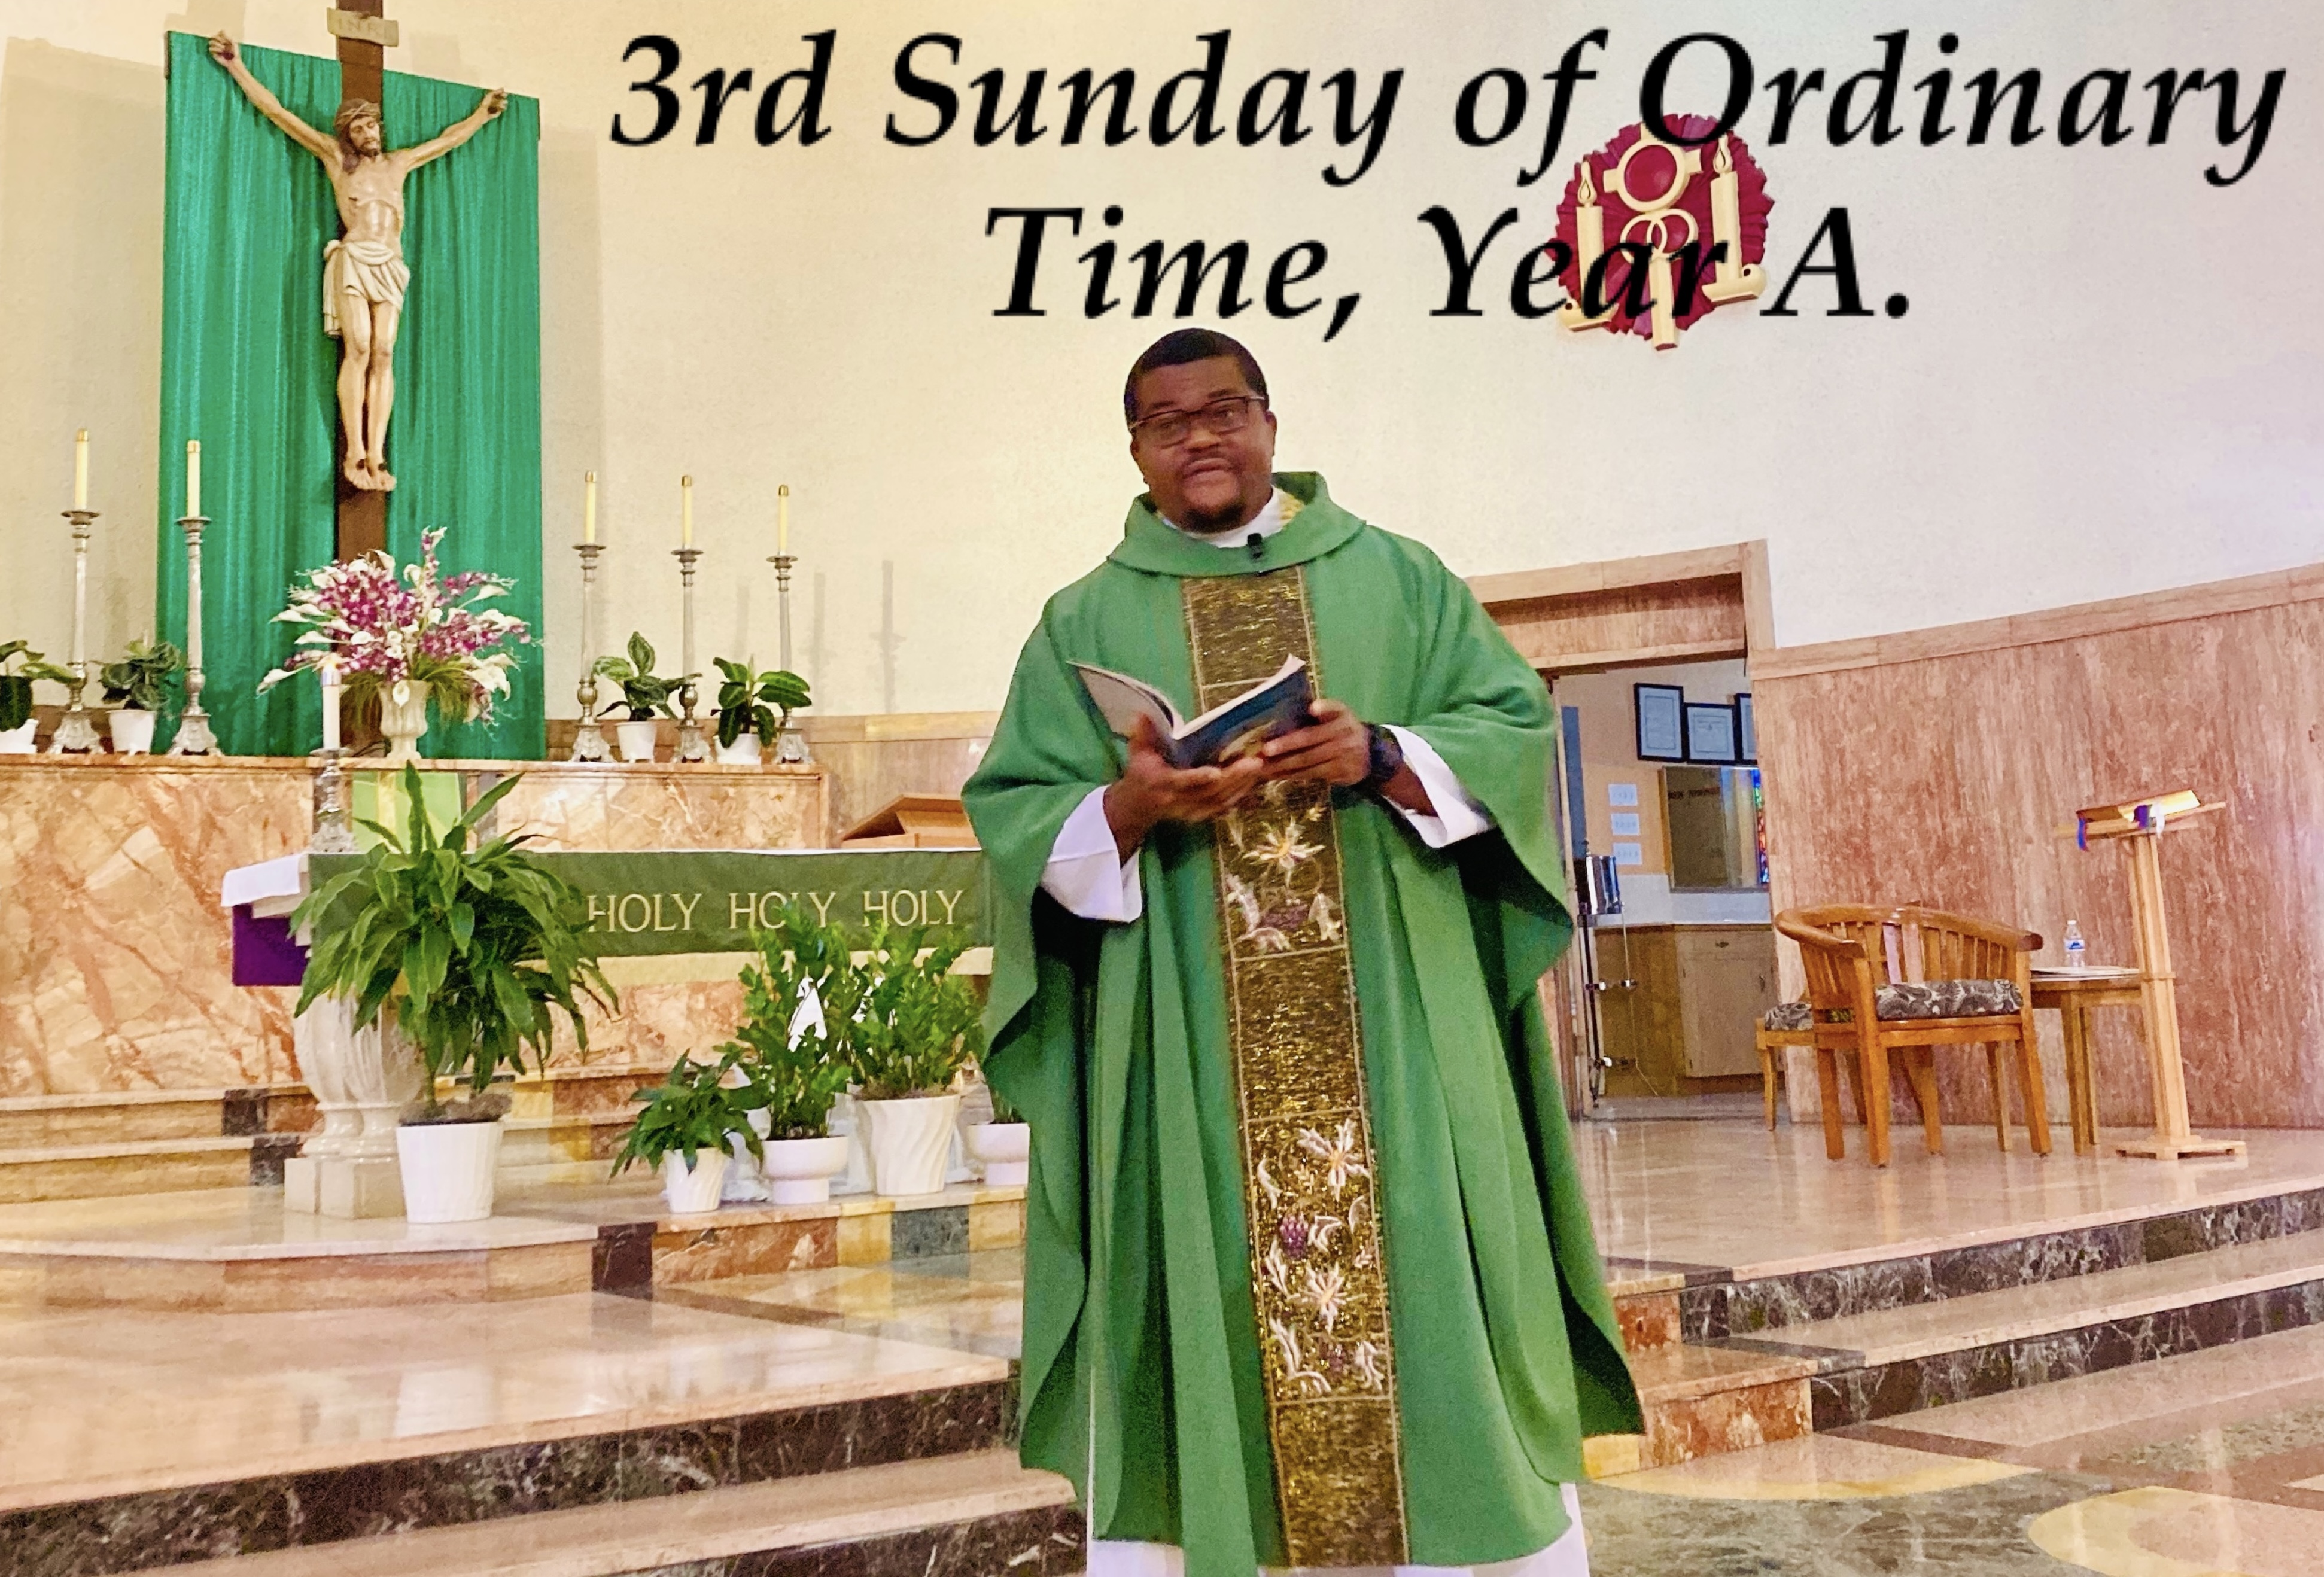 3rd Sunday of Ordinary Time, Year A.